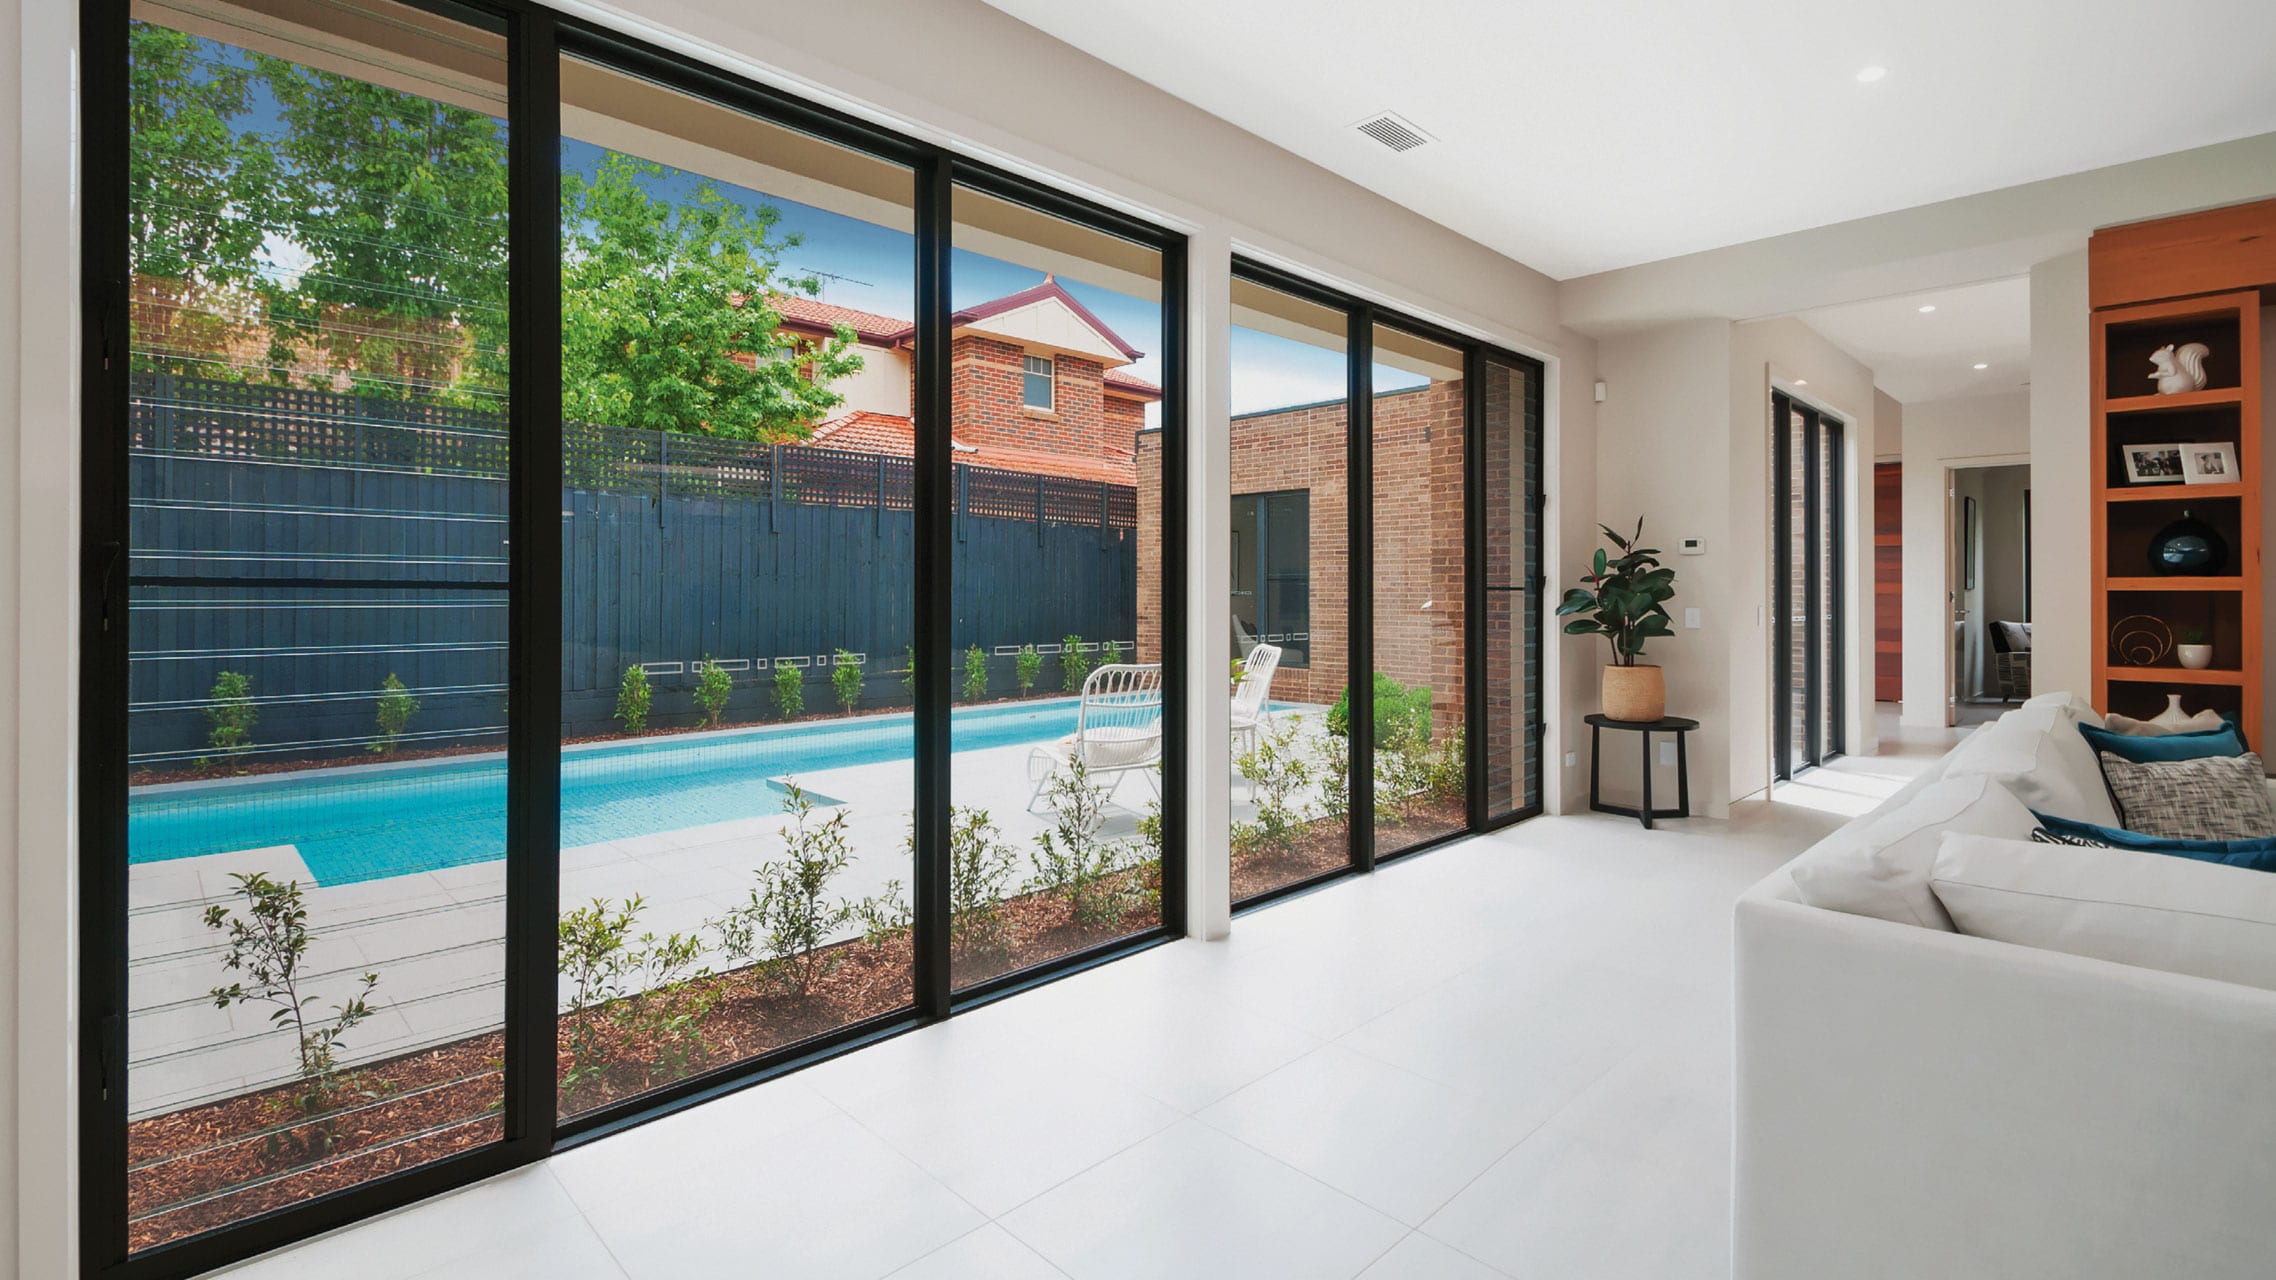 Aluminium Fixed Windows and Louvre Windows with glass blades